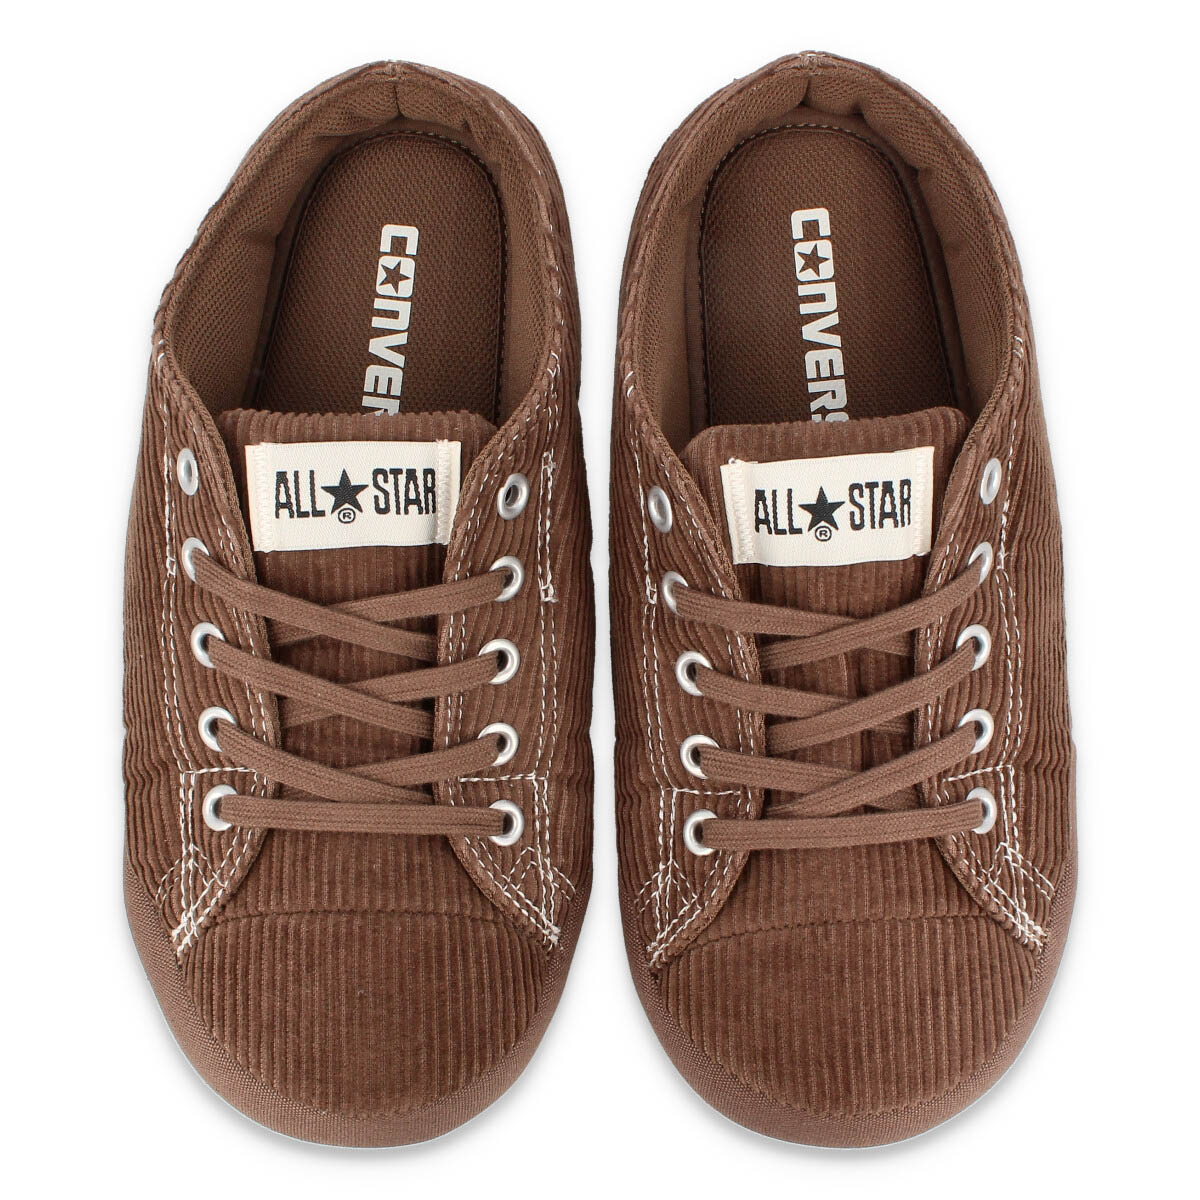 CONVERSE ALL STAR RS CORDUROY OX コンバース オールスター RS コーデュロイ OX BROWN 31306930